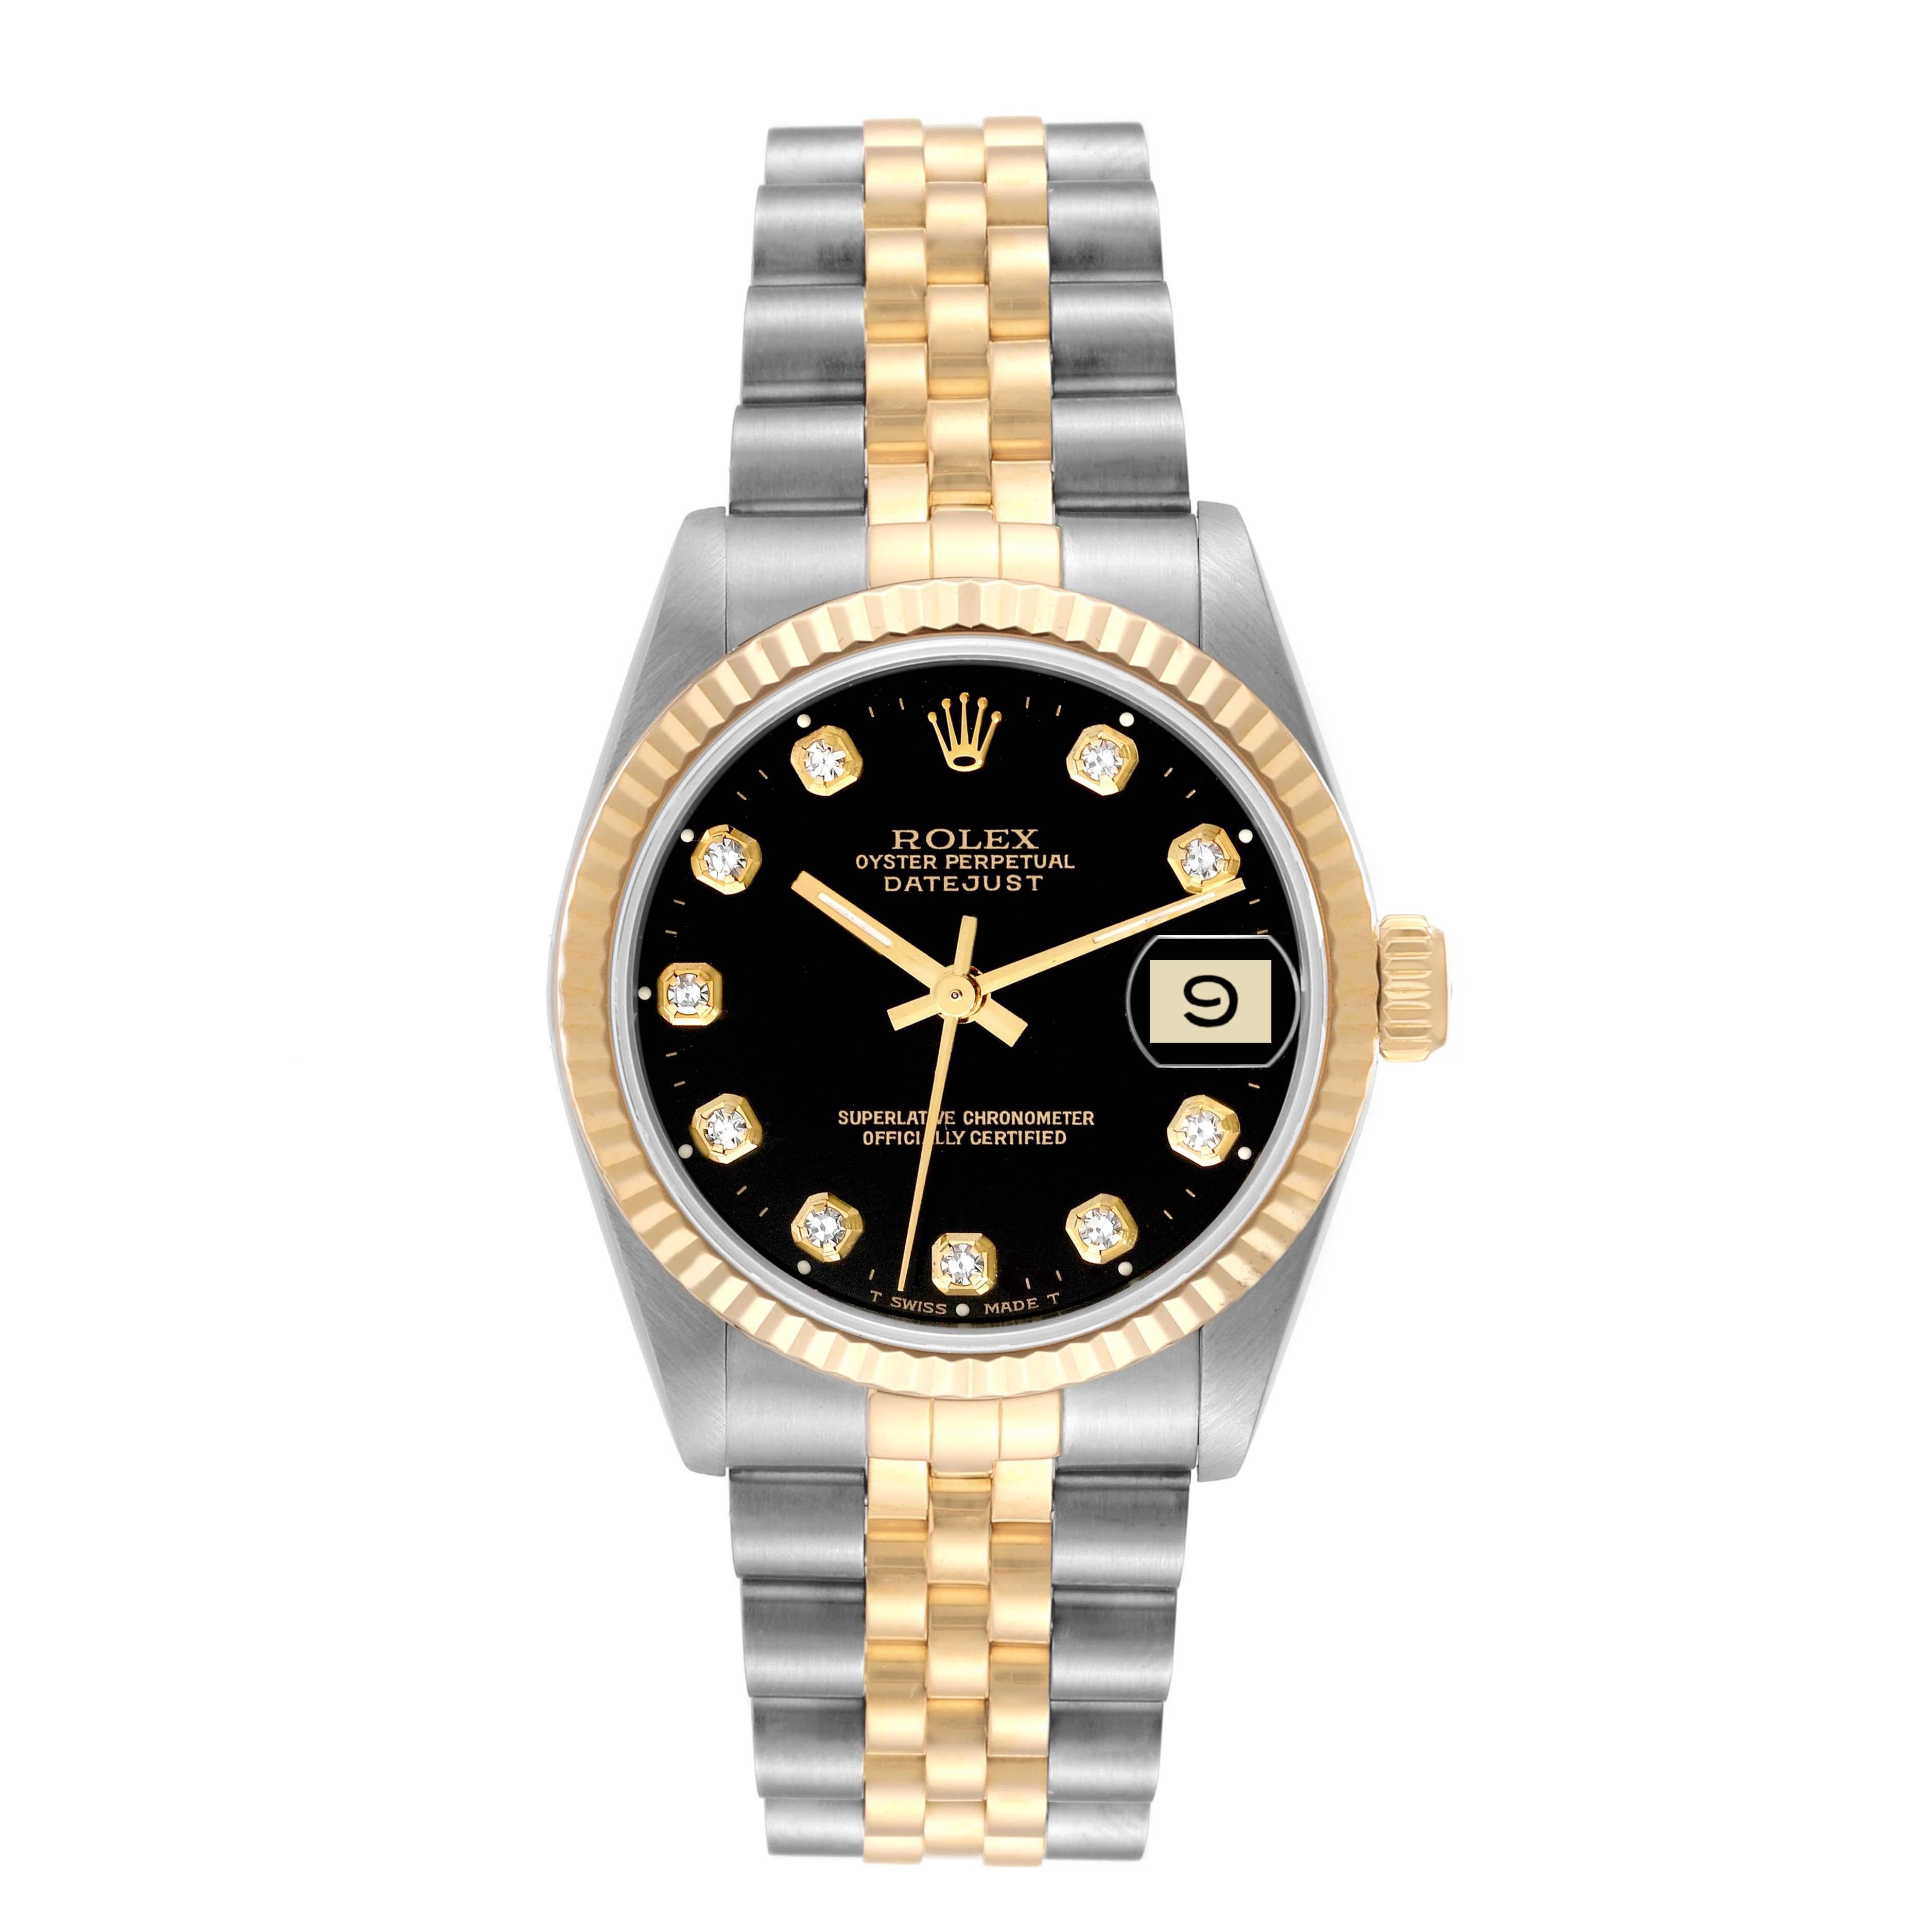 Rolex Datejust Midsize Steel Yellow Gold Black Diamond Ladies Watch 68273. Officially certified chronometer automatic self-winding movement. Stainless steel oyster case 31 mm in diameter. Rolex logo on an 18K yellow gold crown. 18k yellow gold